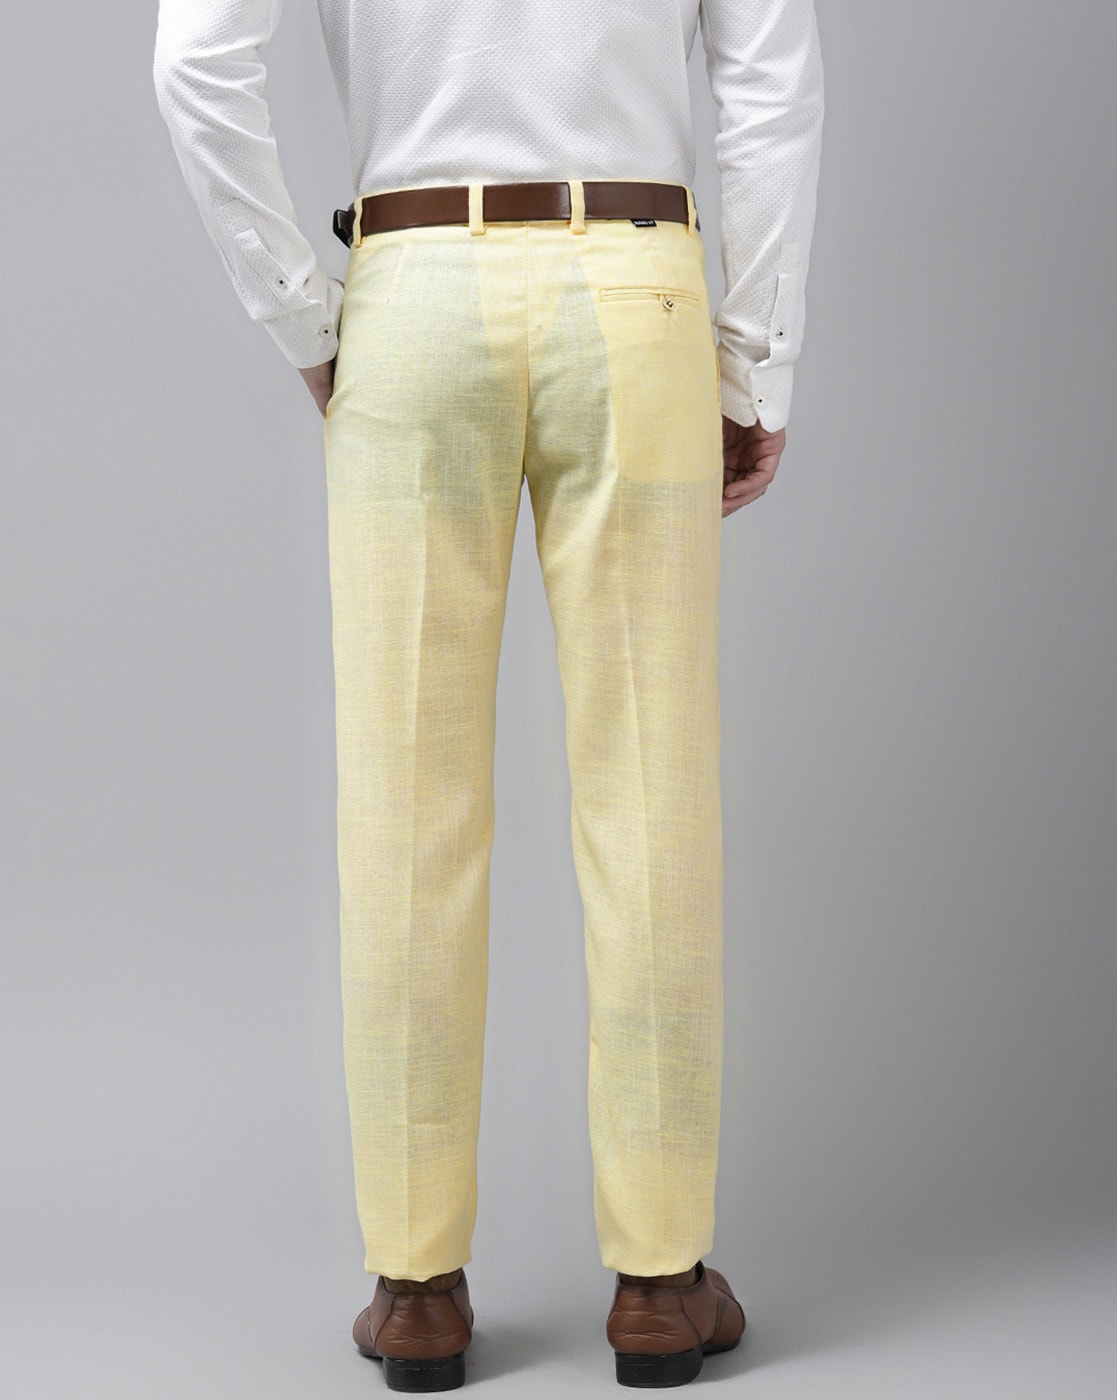 Buy Mens Casual Chinos Trousers Cream Yellow and White Combo of 3 PV Cotton  for Best Price, Reviews, Free Shipping